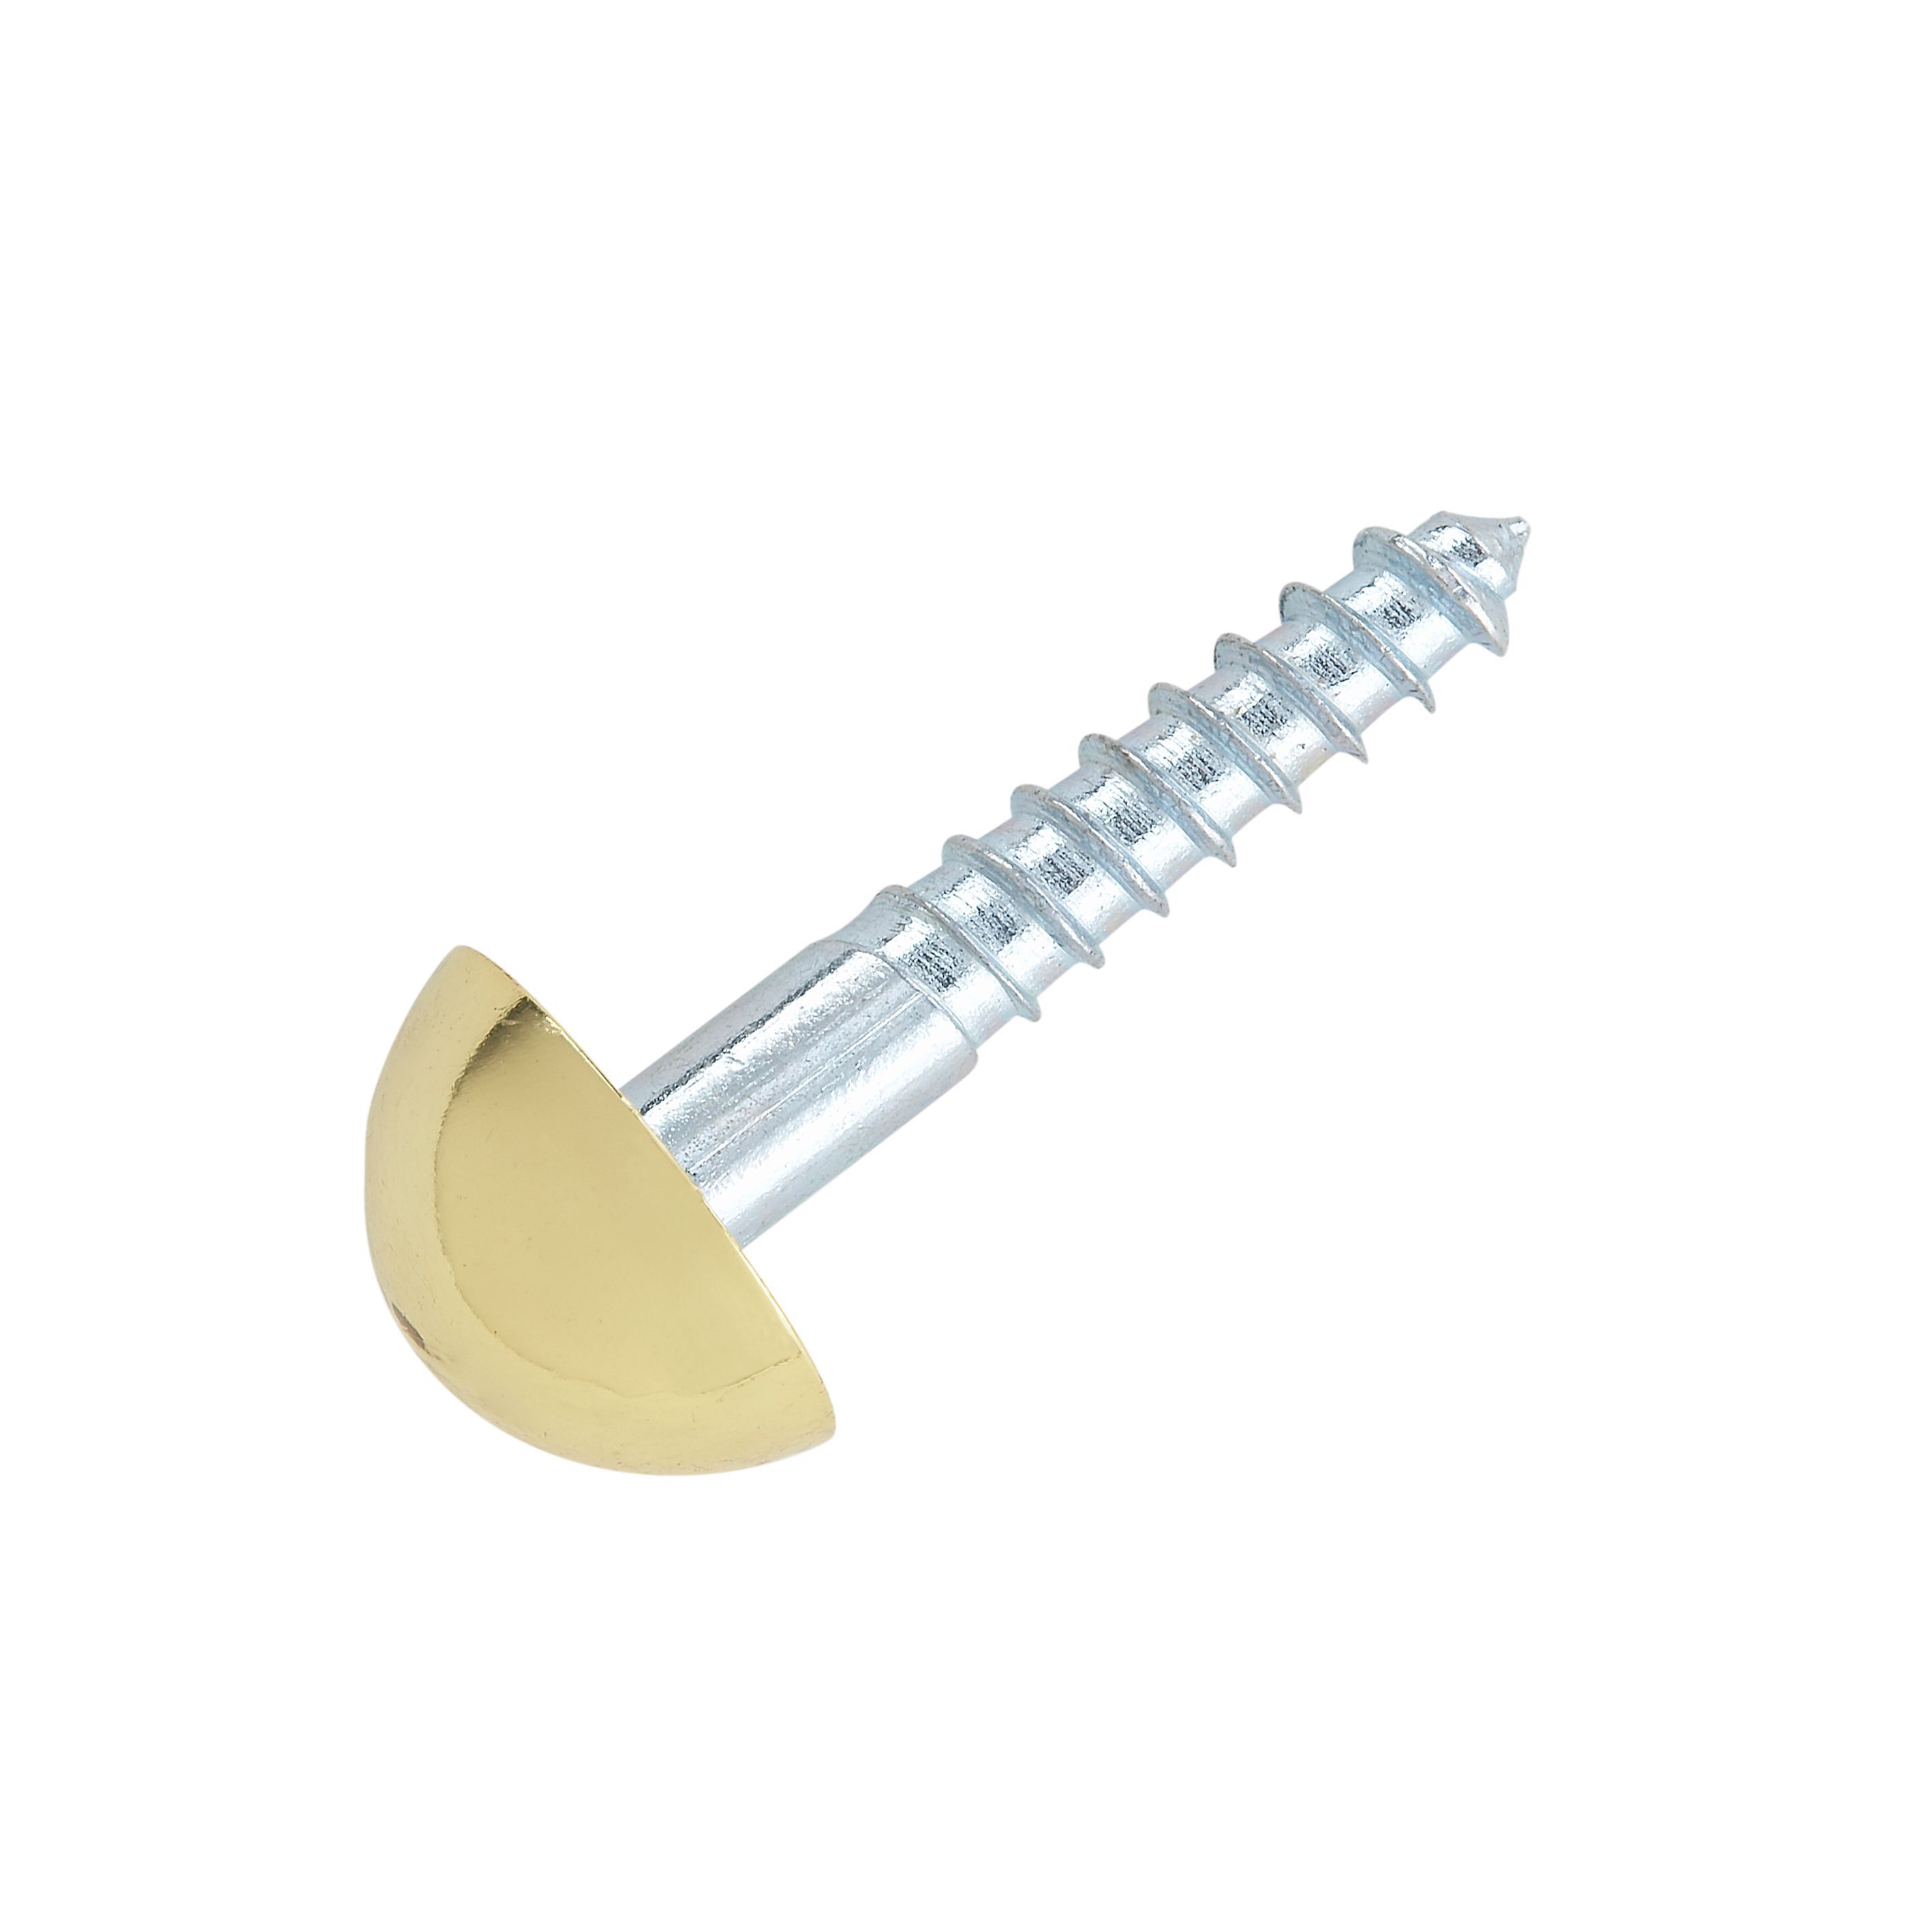 Slotted Flat countersunk Mirror screw (L)25mm, Pack of 4